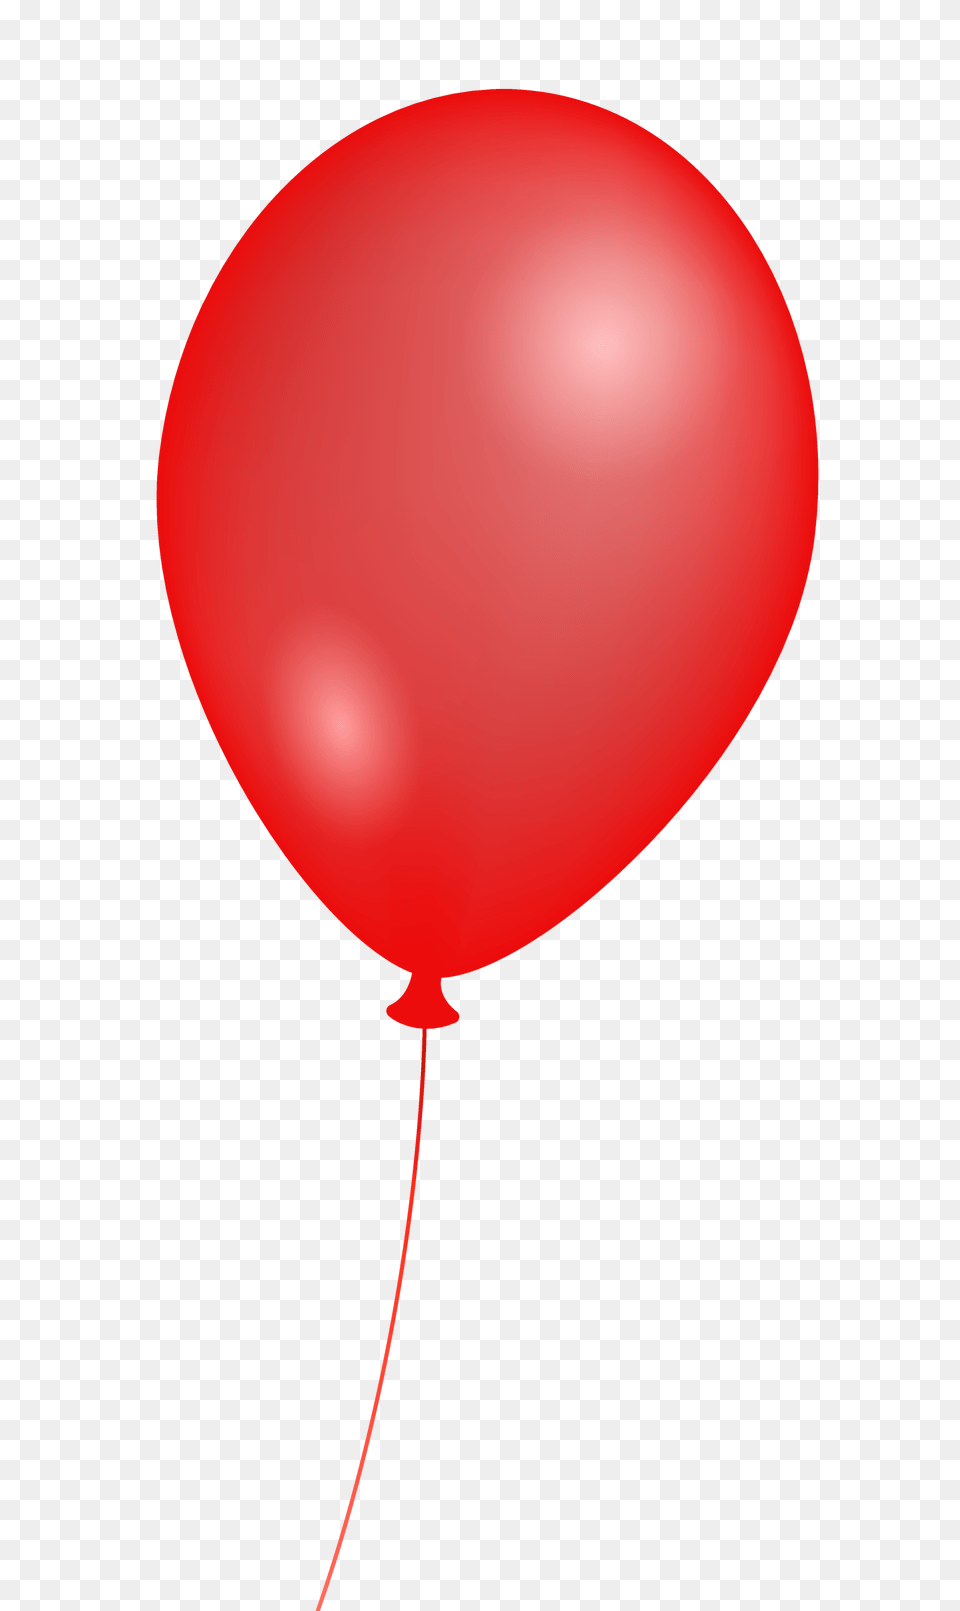 Pngpix Com Balloon Image, First Aid Free Transparent Png